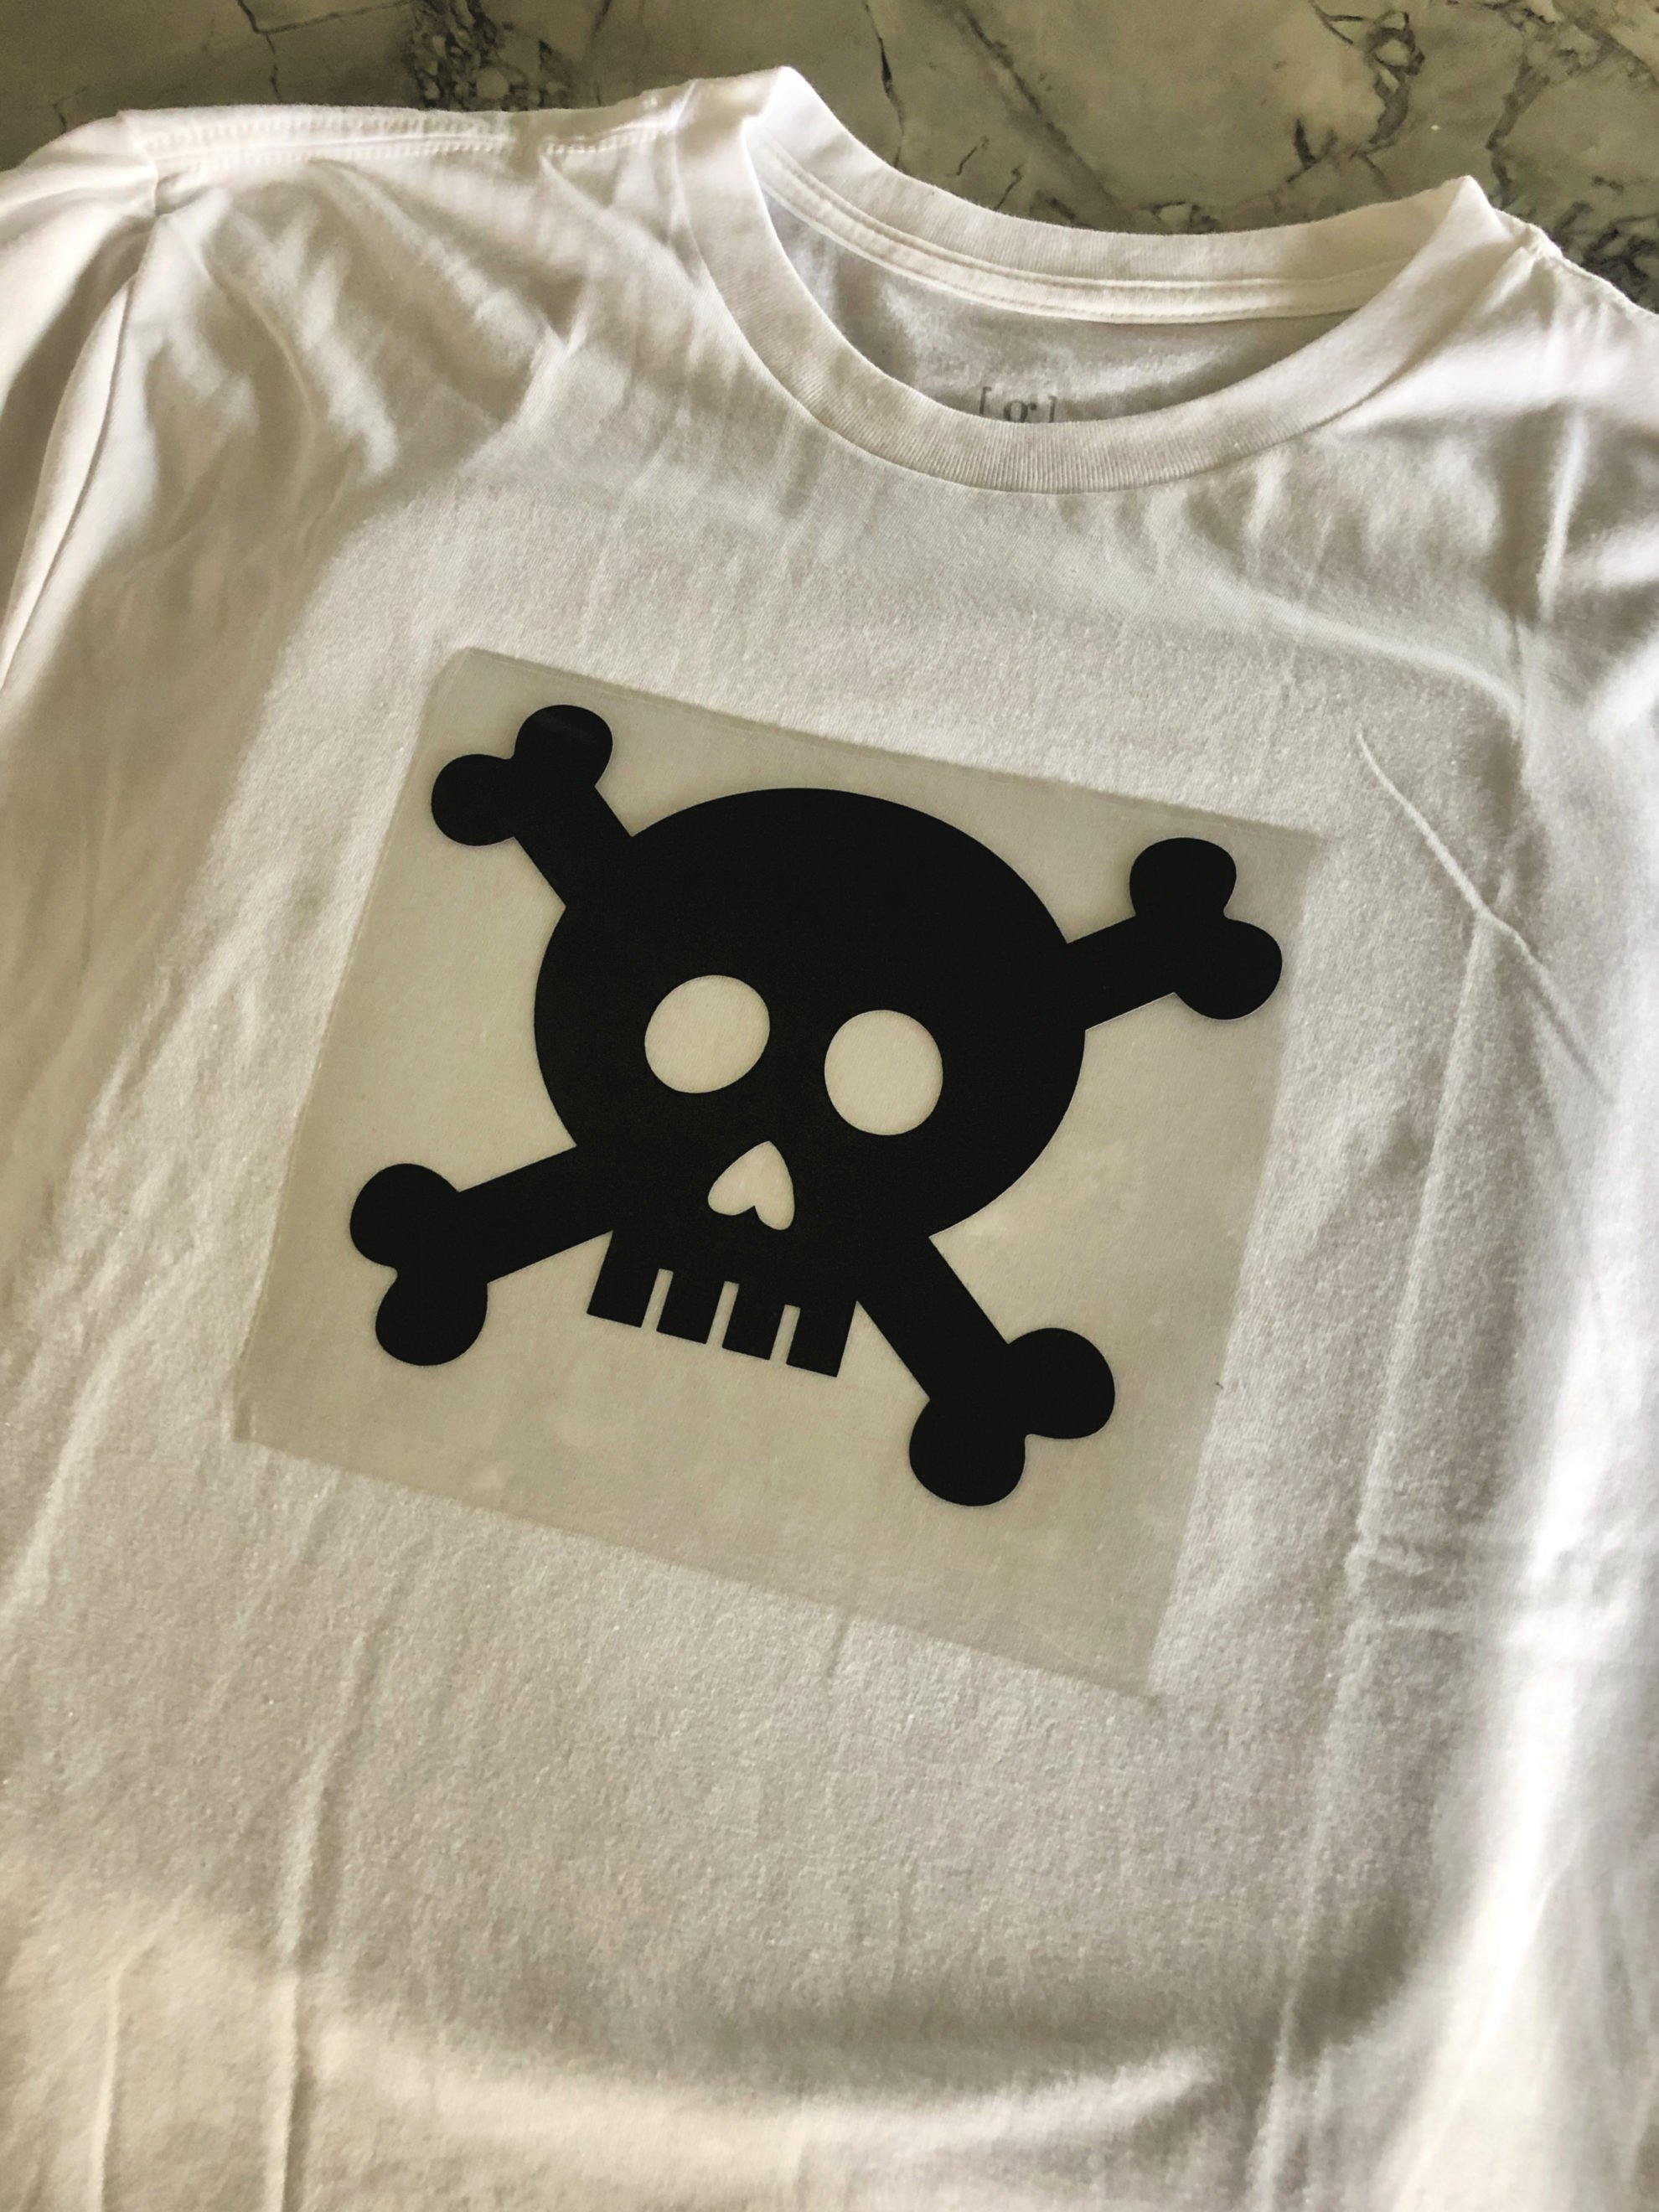 White tshirt with a skull and crossbones on the shirt.